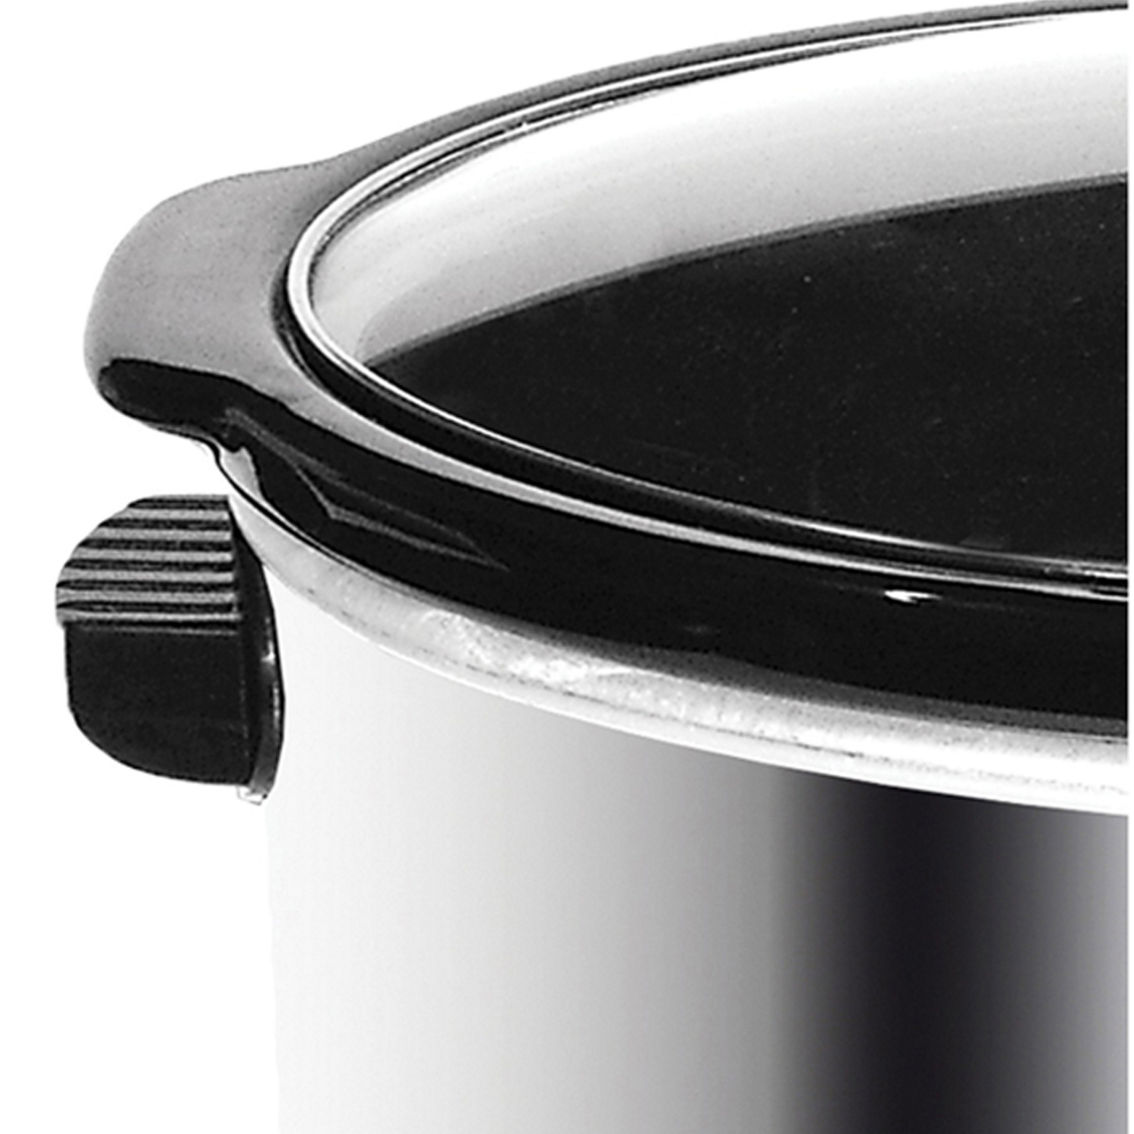 Brentwood 360W Stainless Steel 8 qt. Slow Cooker - Image 8 of 9